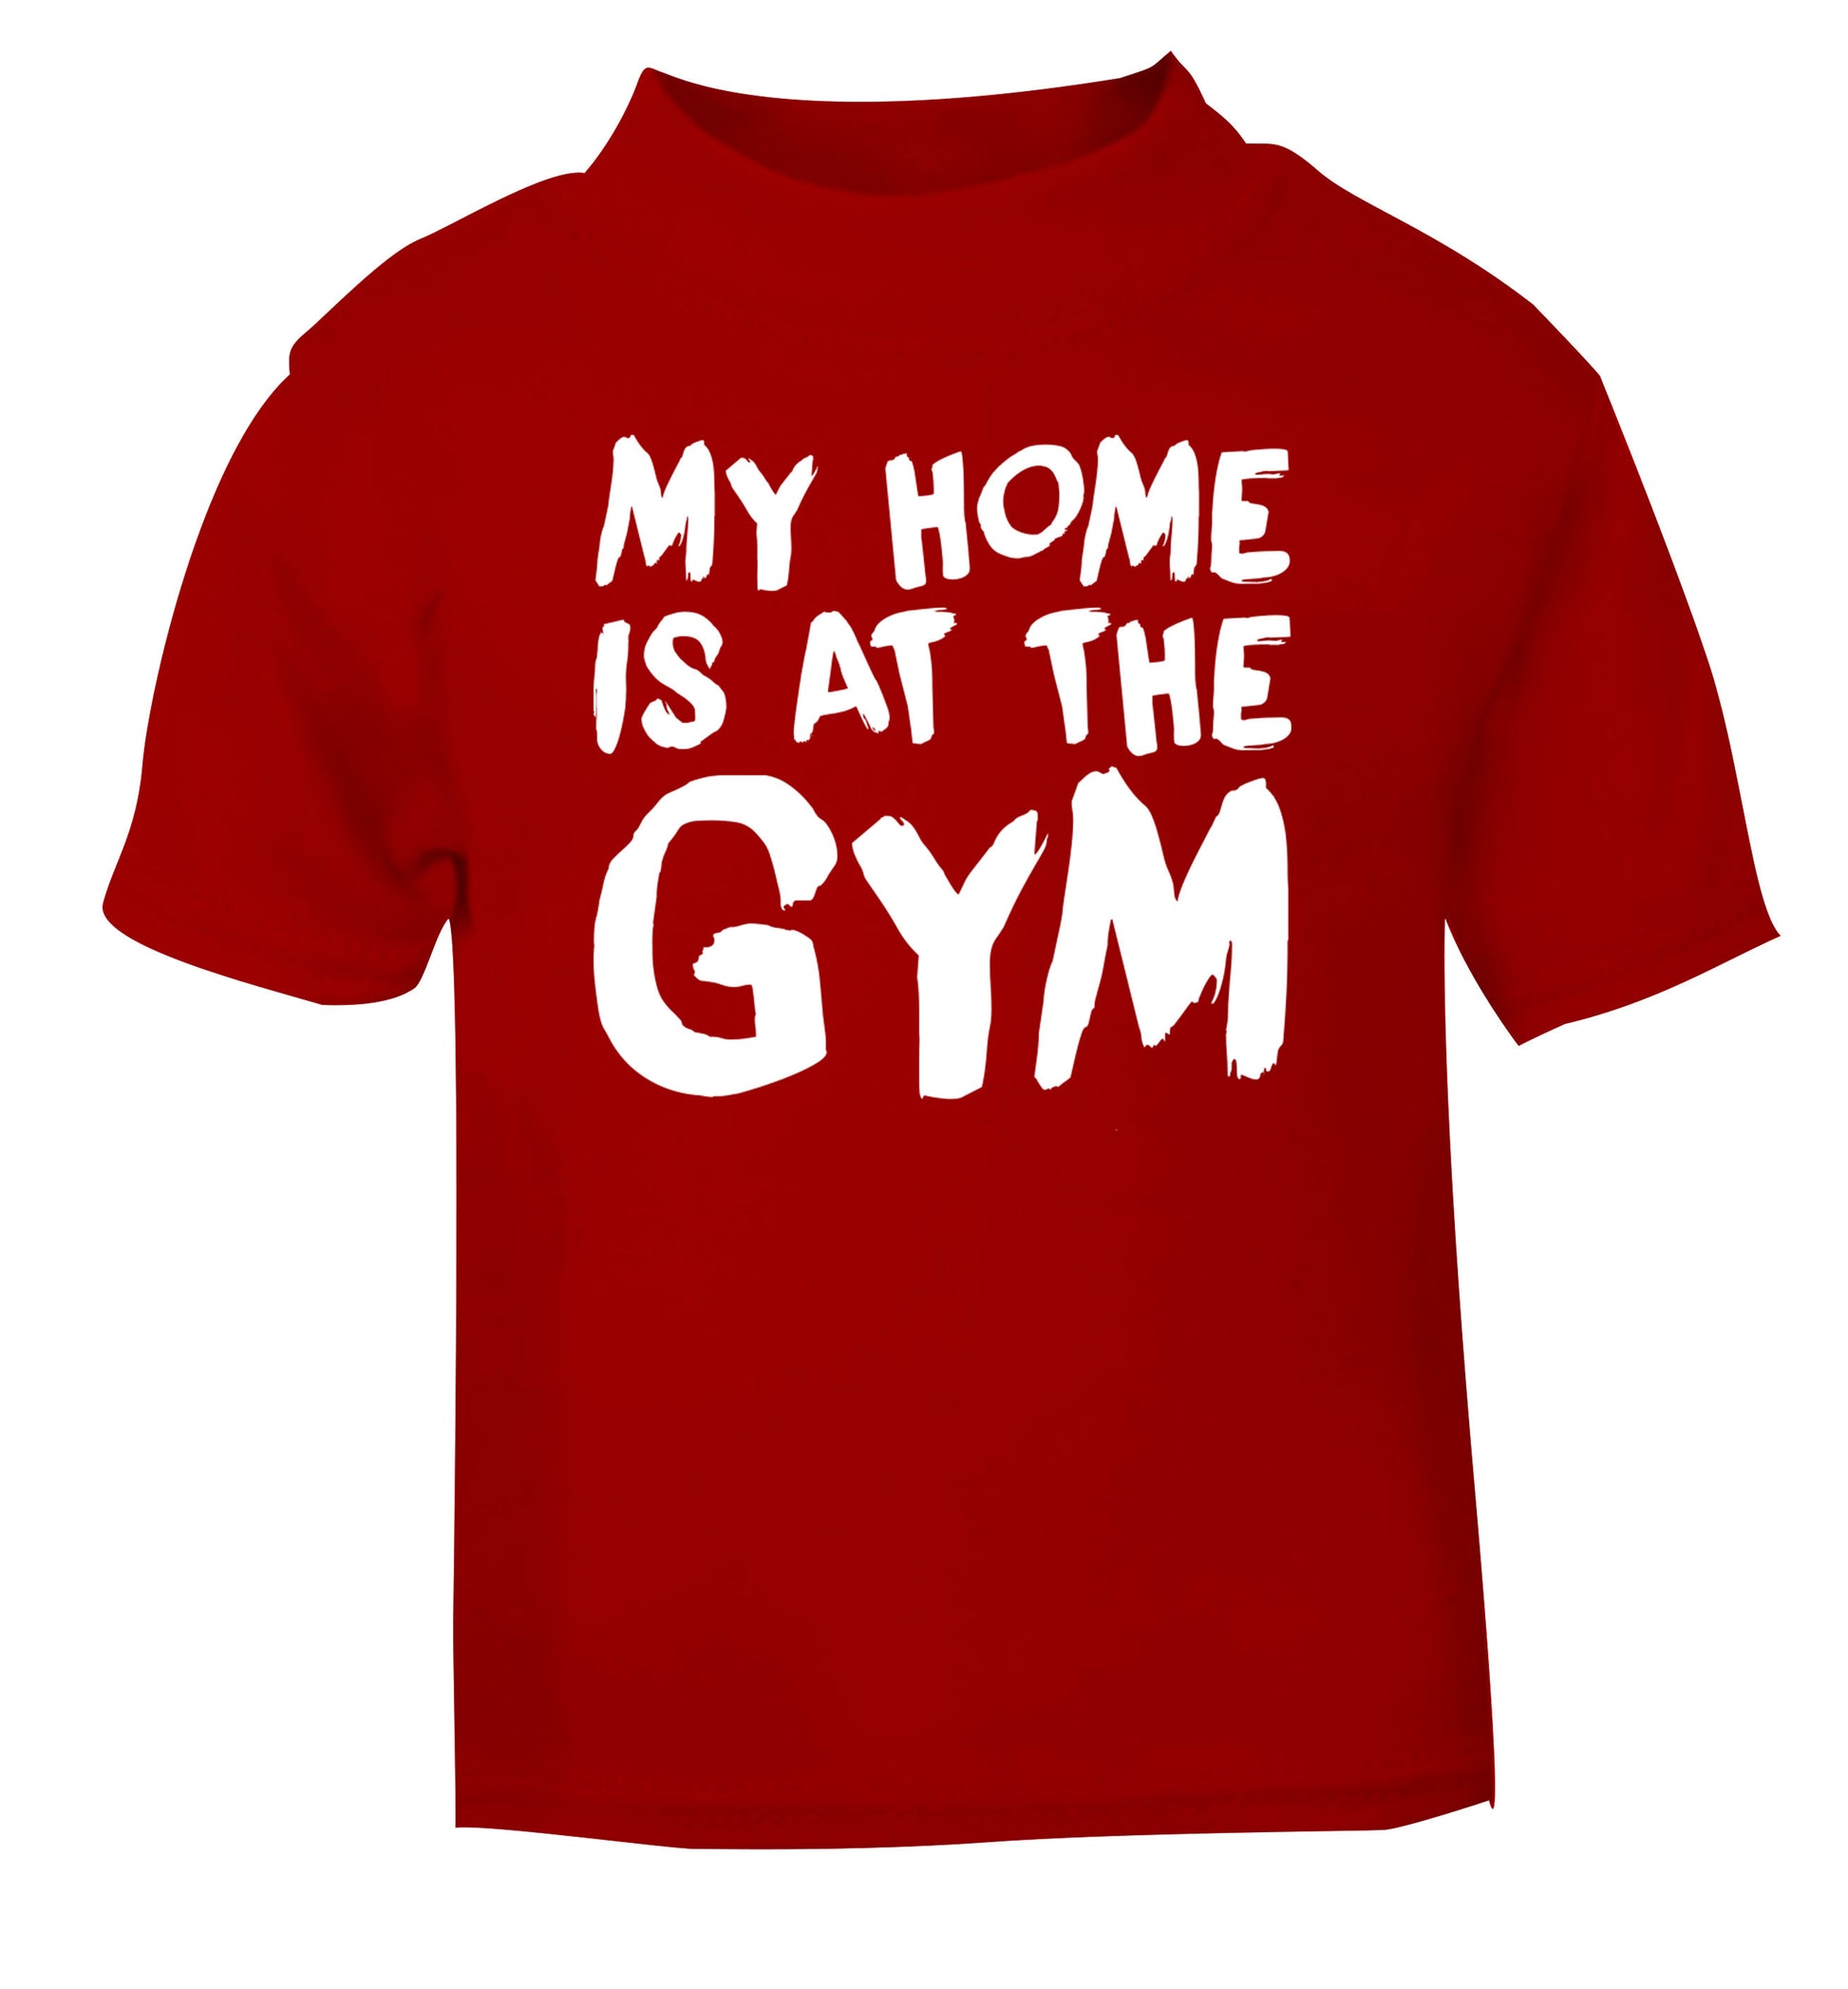 My home is at the gym red Baby Toddler Tshirt 2 Years